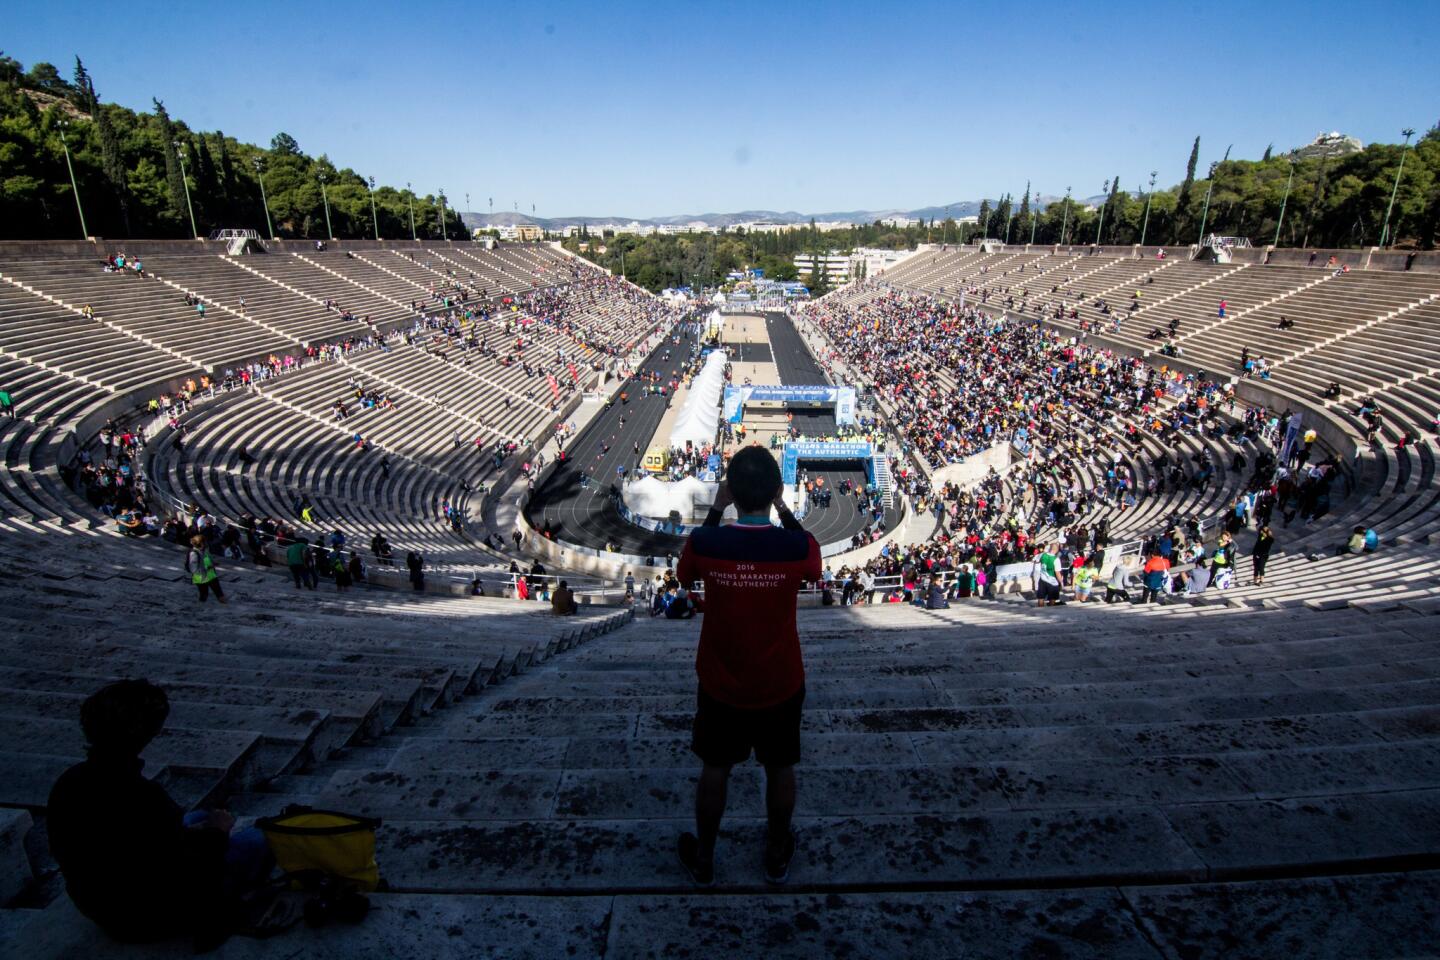 The marble Panathenaic Stadium, home to the first modern Olympic Games in 1896, marks the finish line for the Athens Marathon. The next installment of the race takes place Nov. 12.